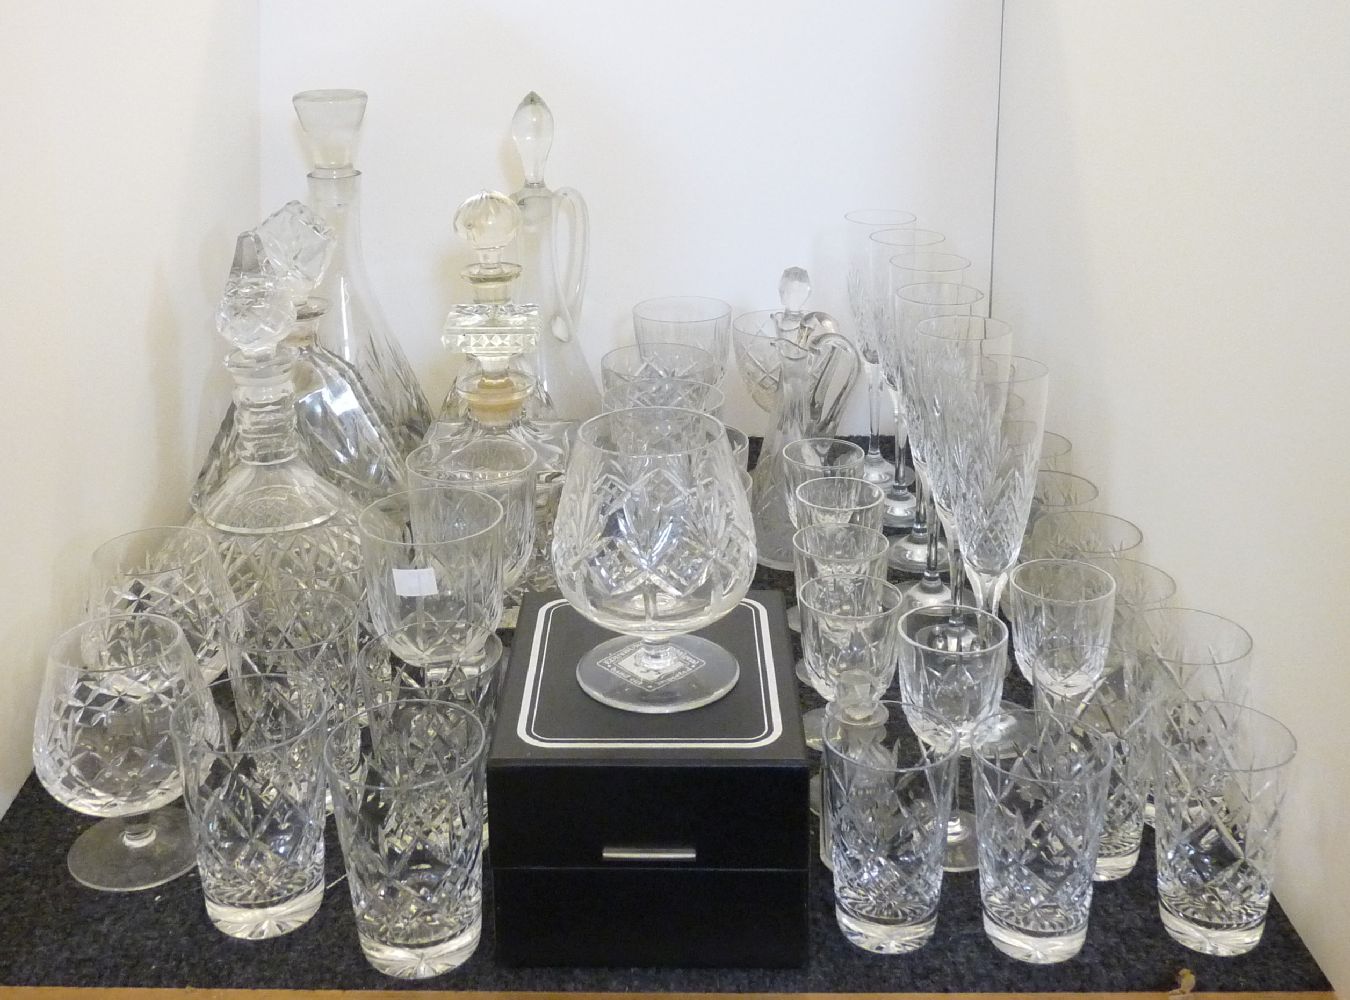 A quantity of cut glass decanters, and drinking glasses